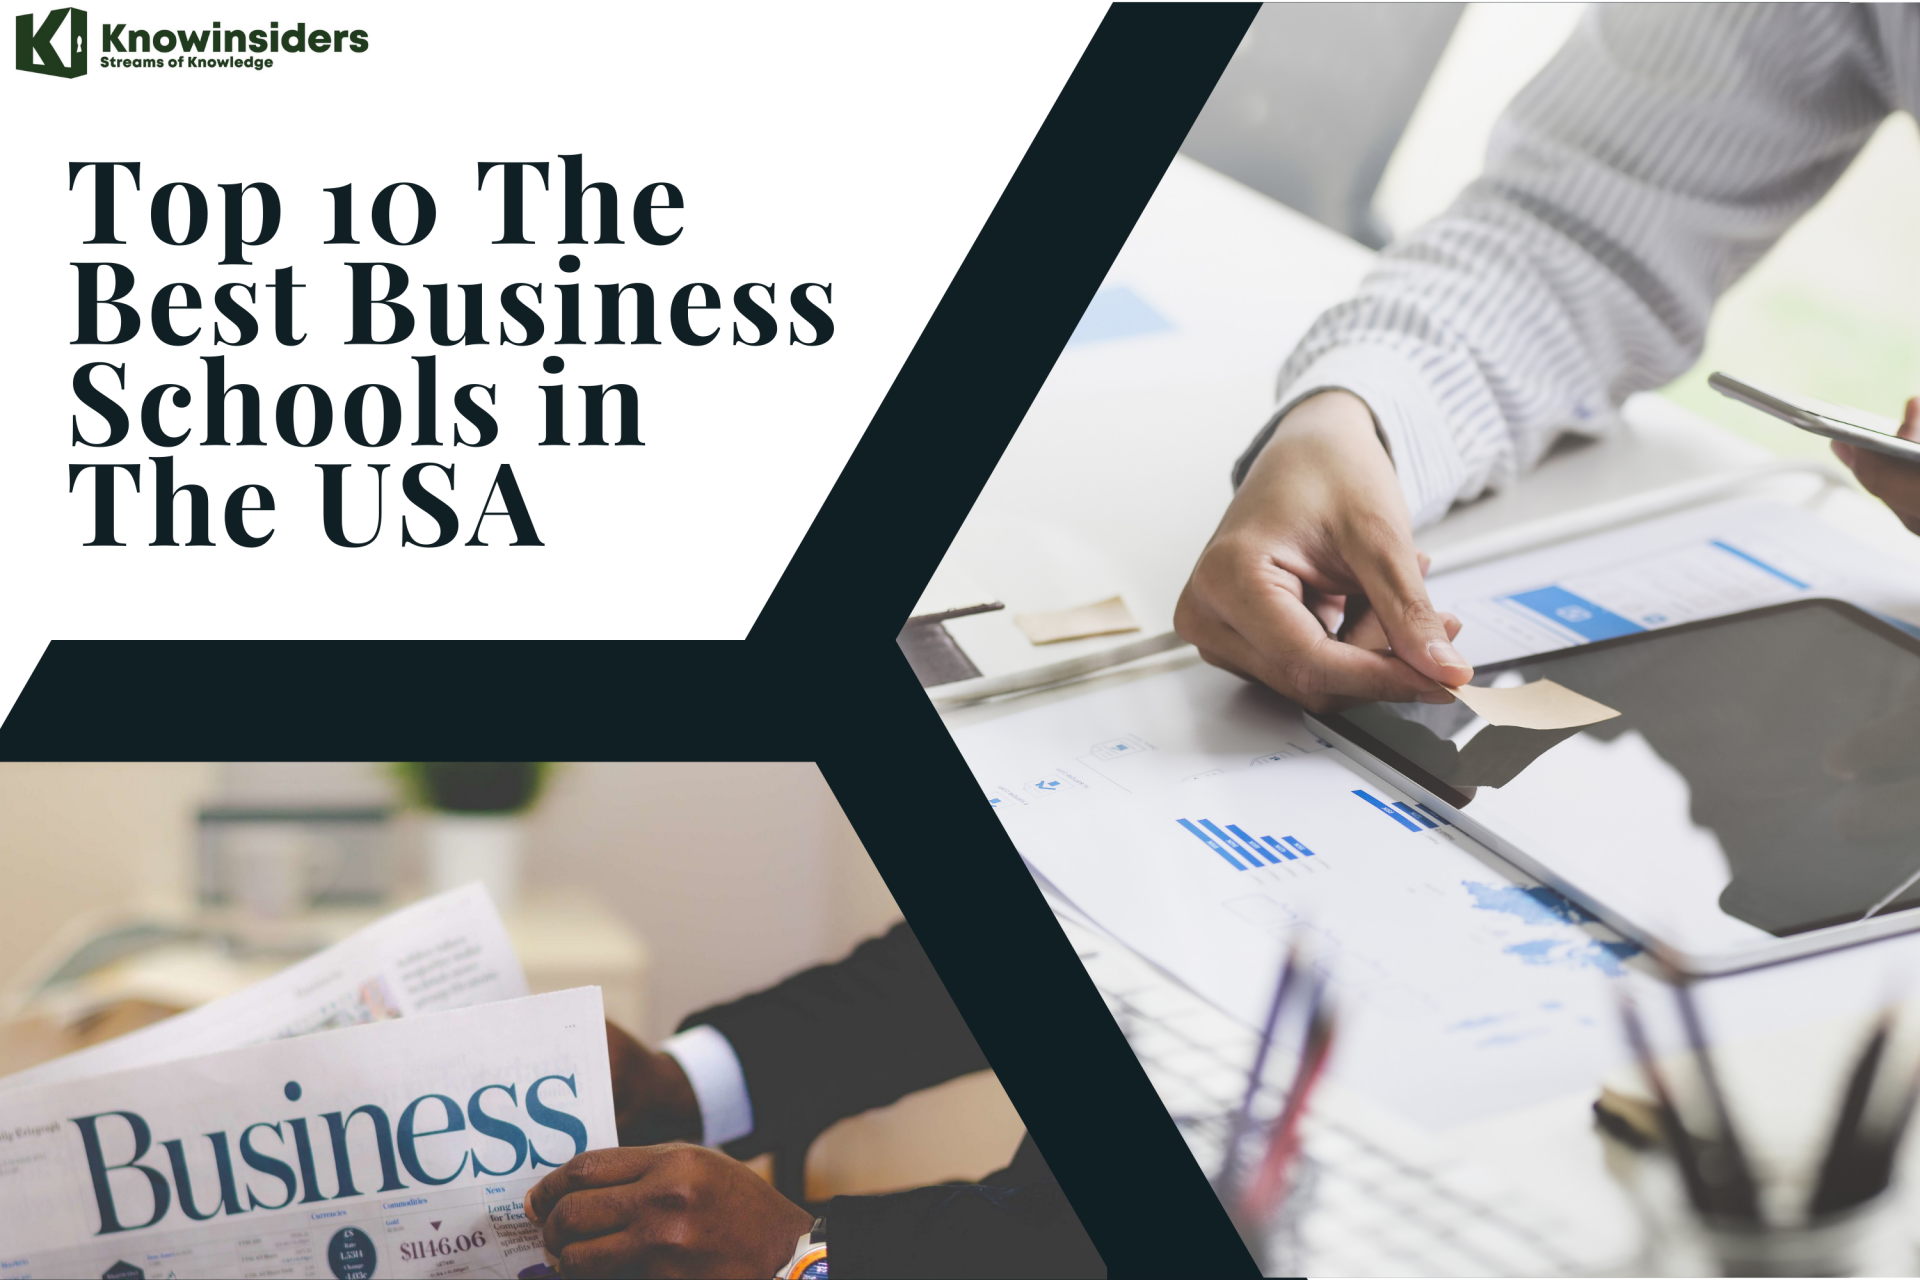 Top 10 The Best Business Schools in The USA